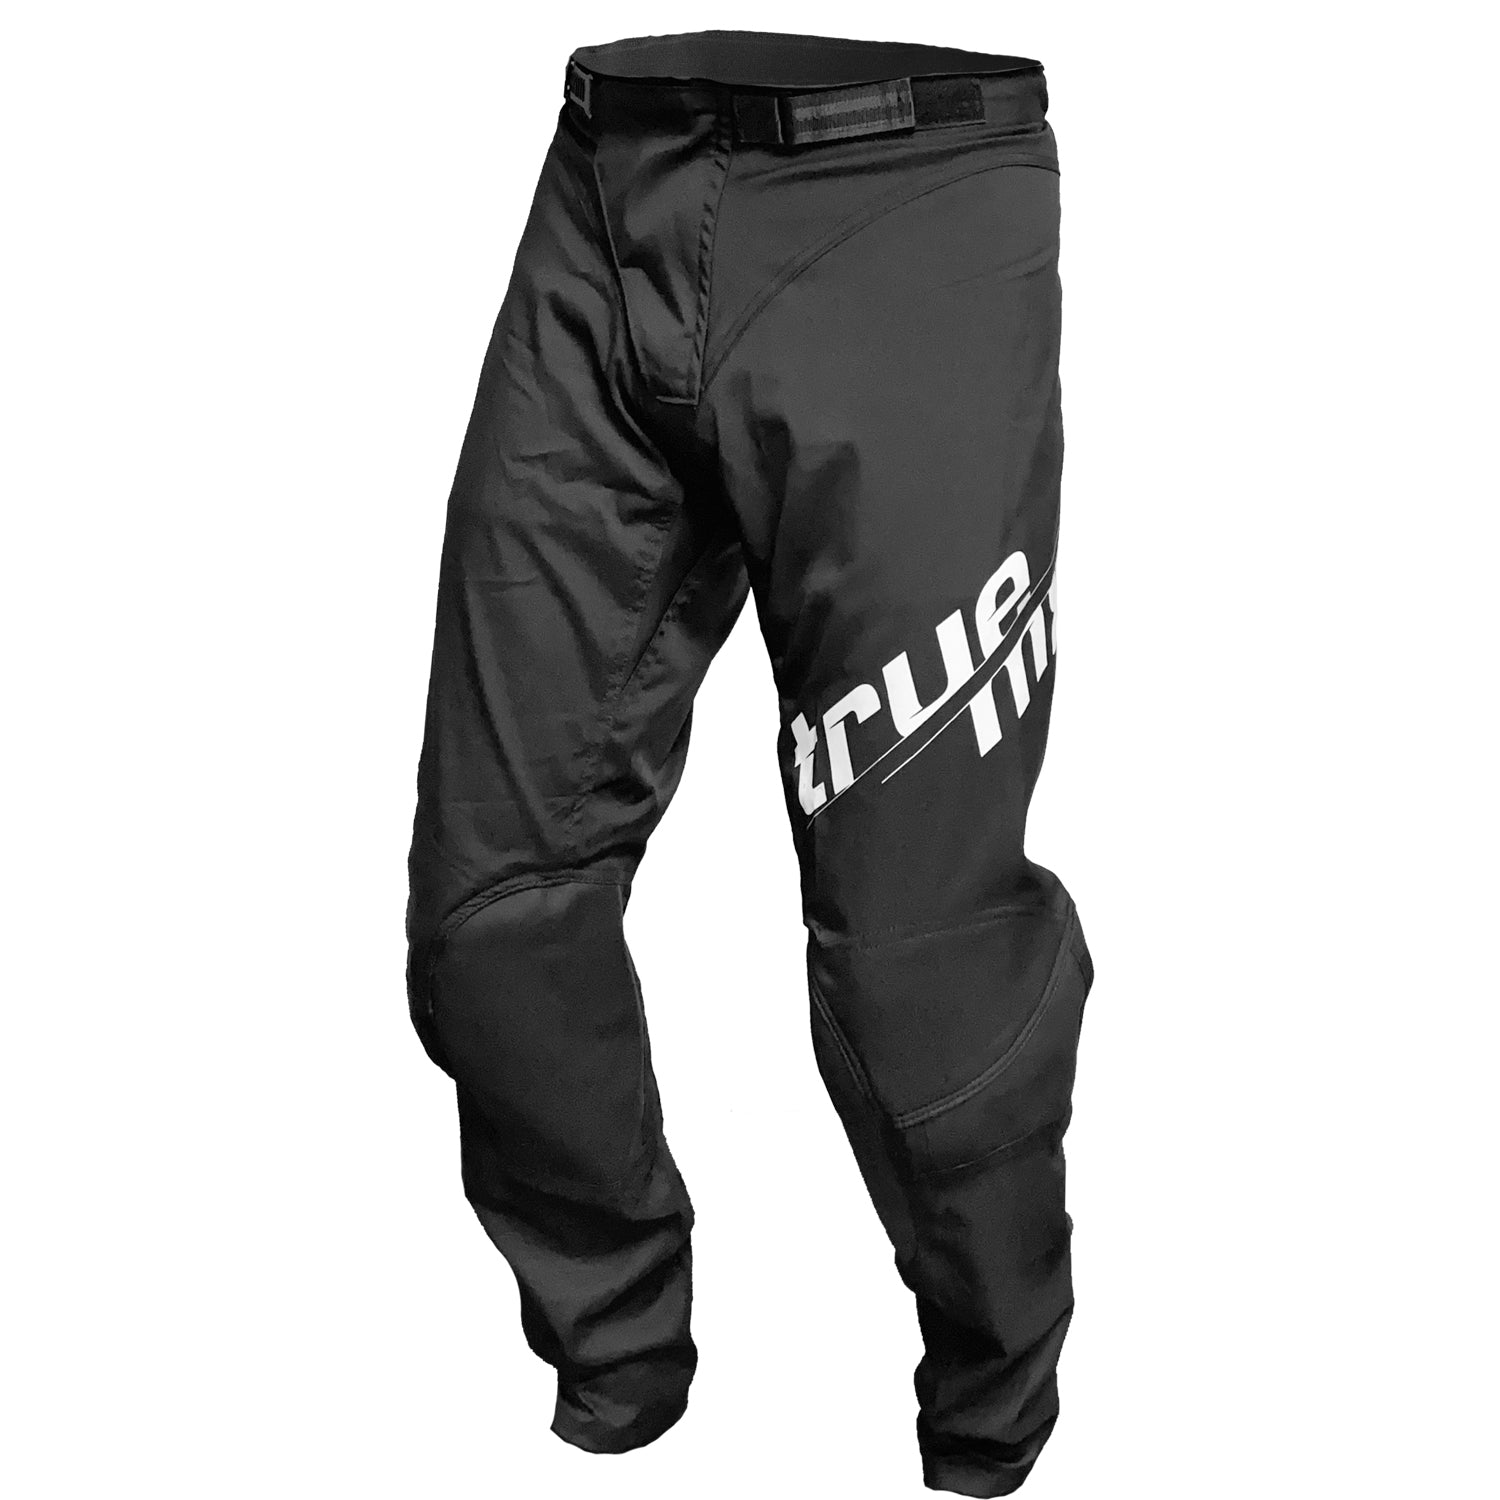 2021 #TRUTH Motocross Pant - [CLOSEOUT]